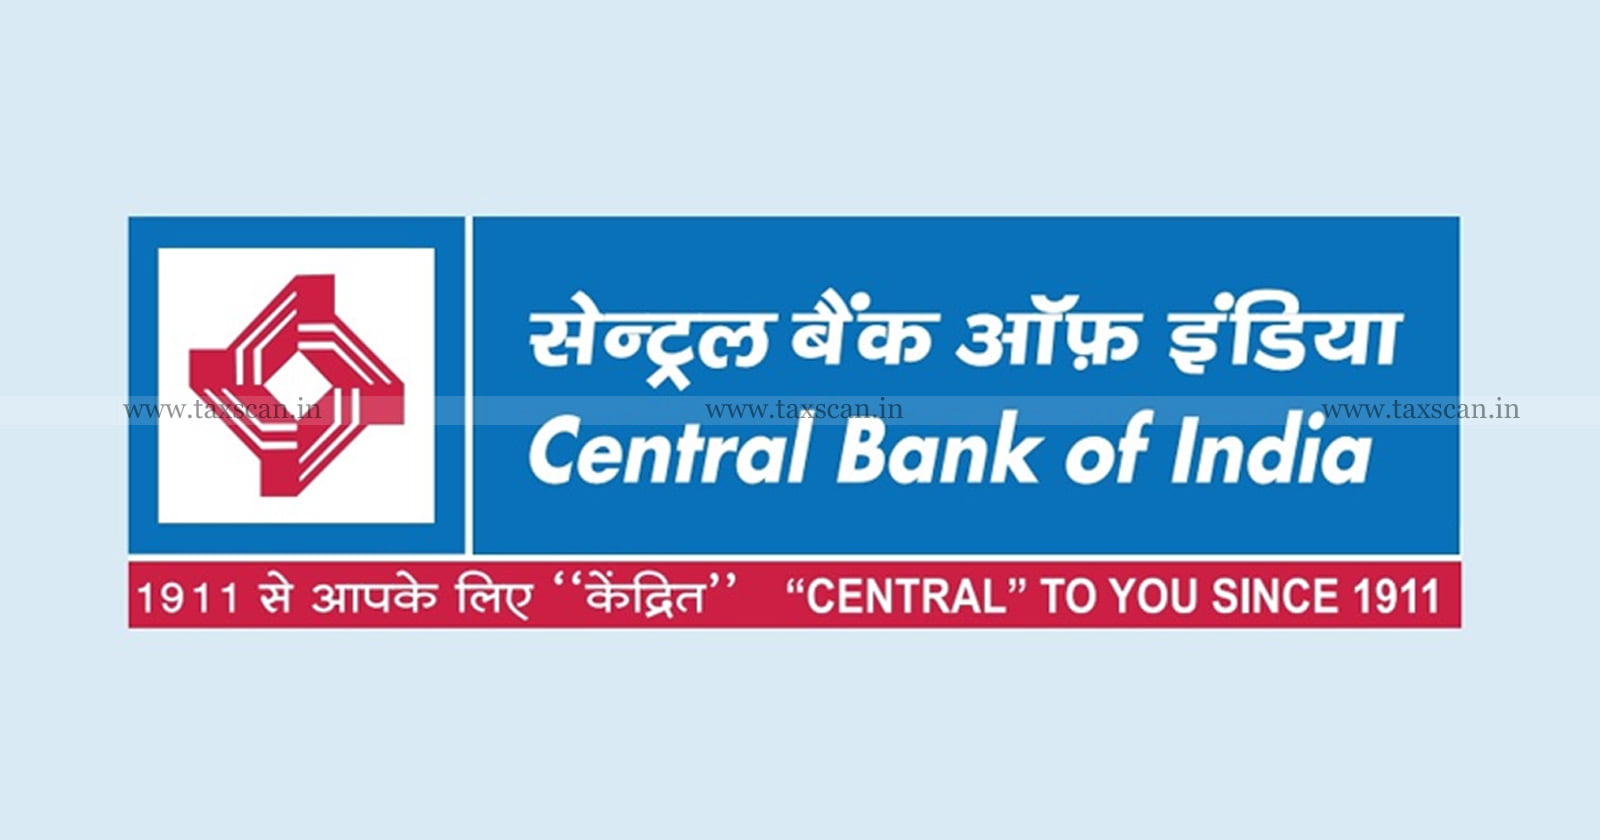 Central Bank of India - Low interest loans for CA professionals - CA professionals - CA office development loans - taxscan